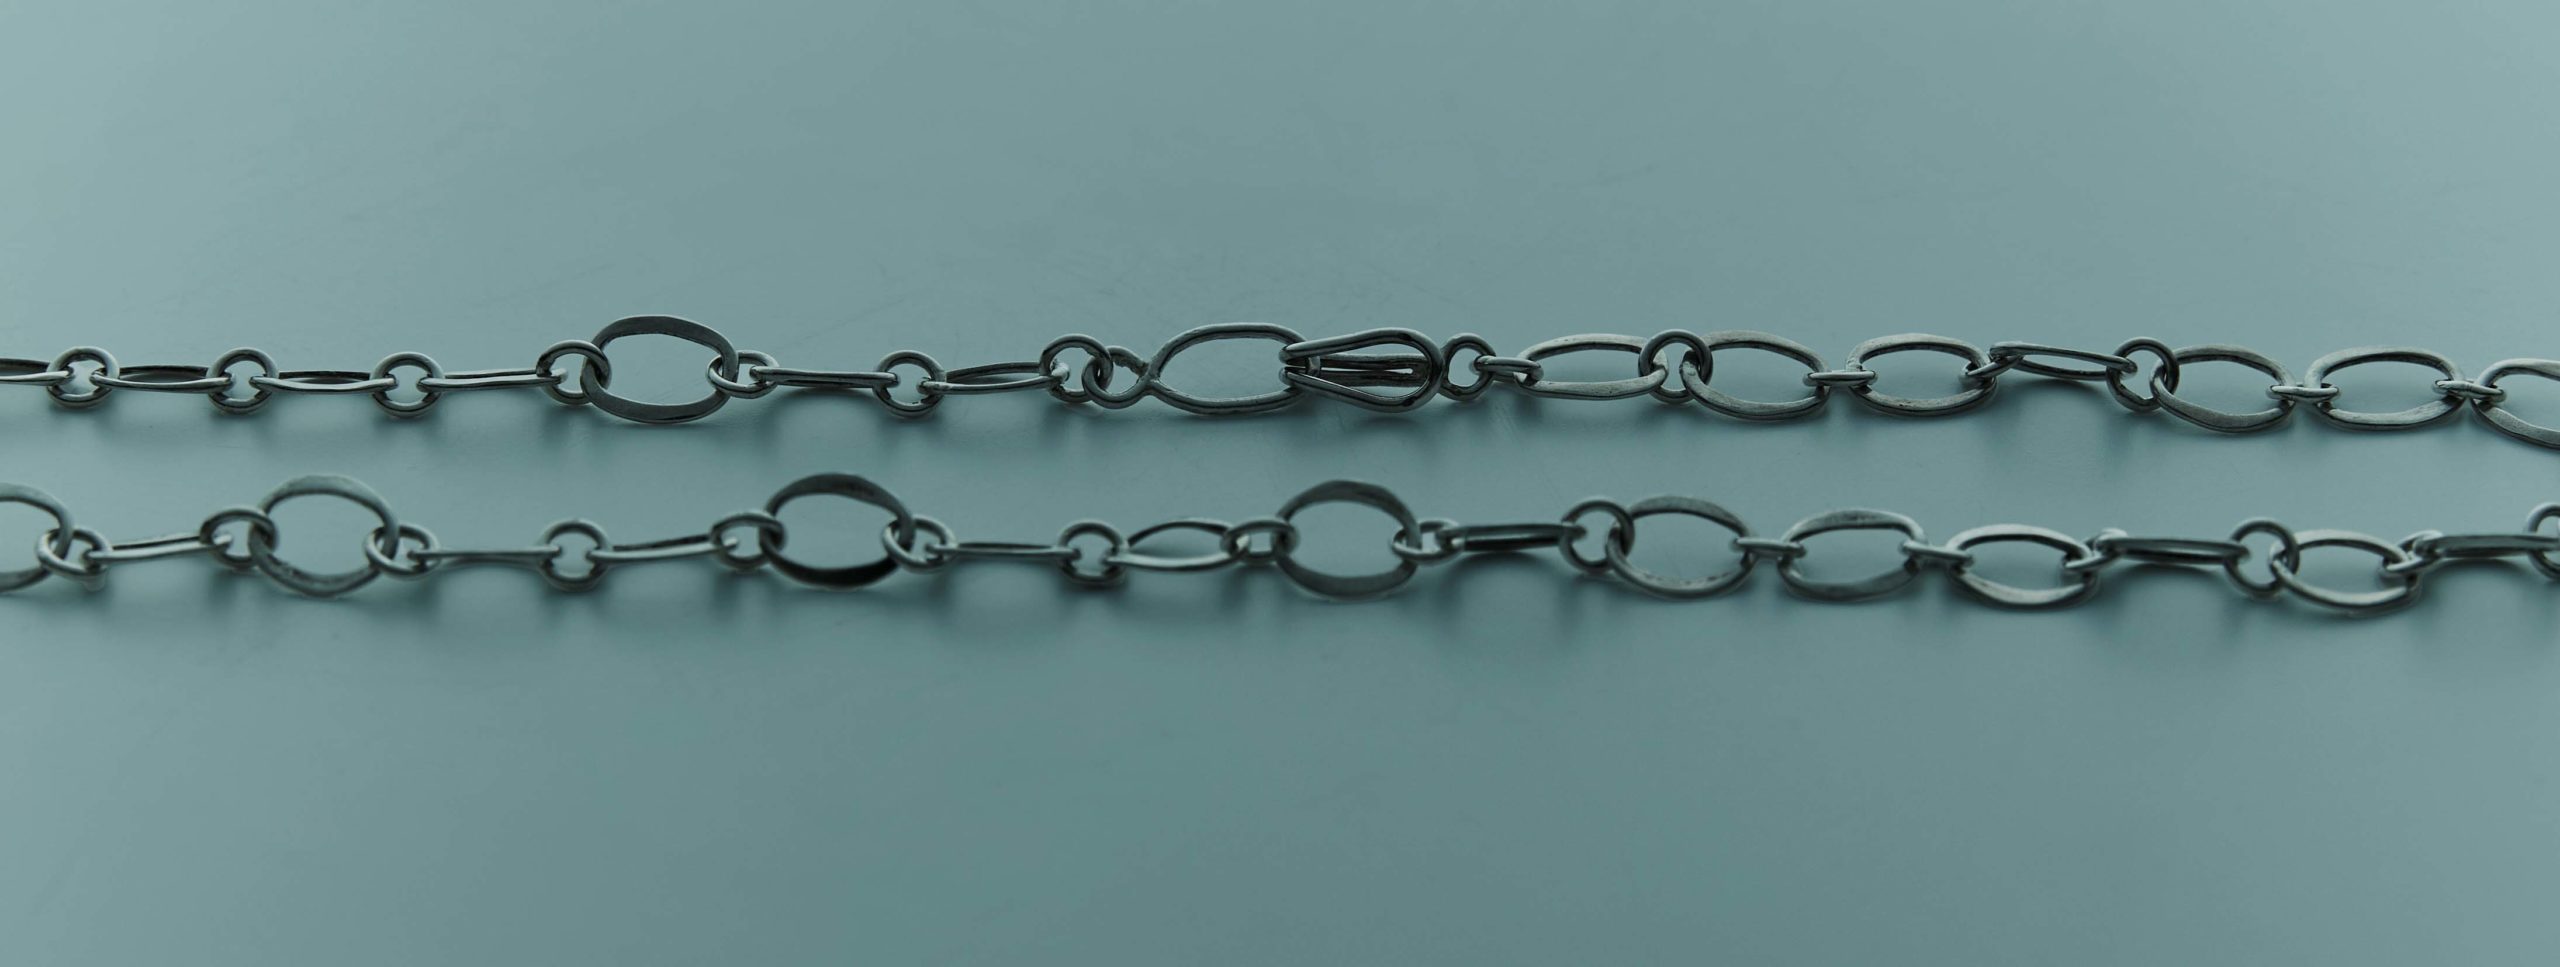 hummered link chain